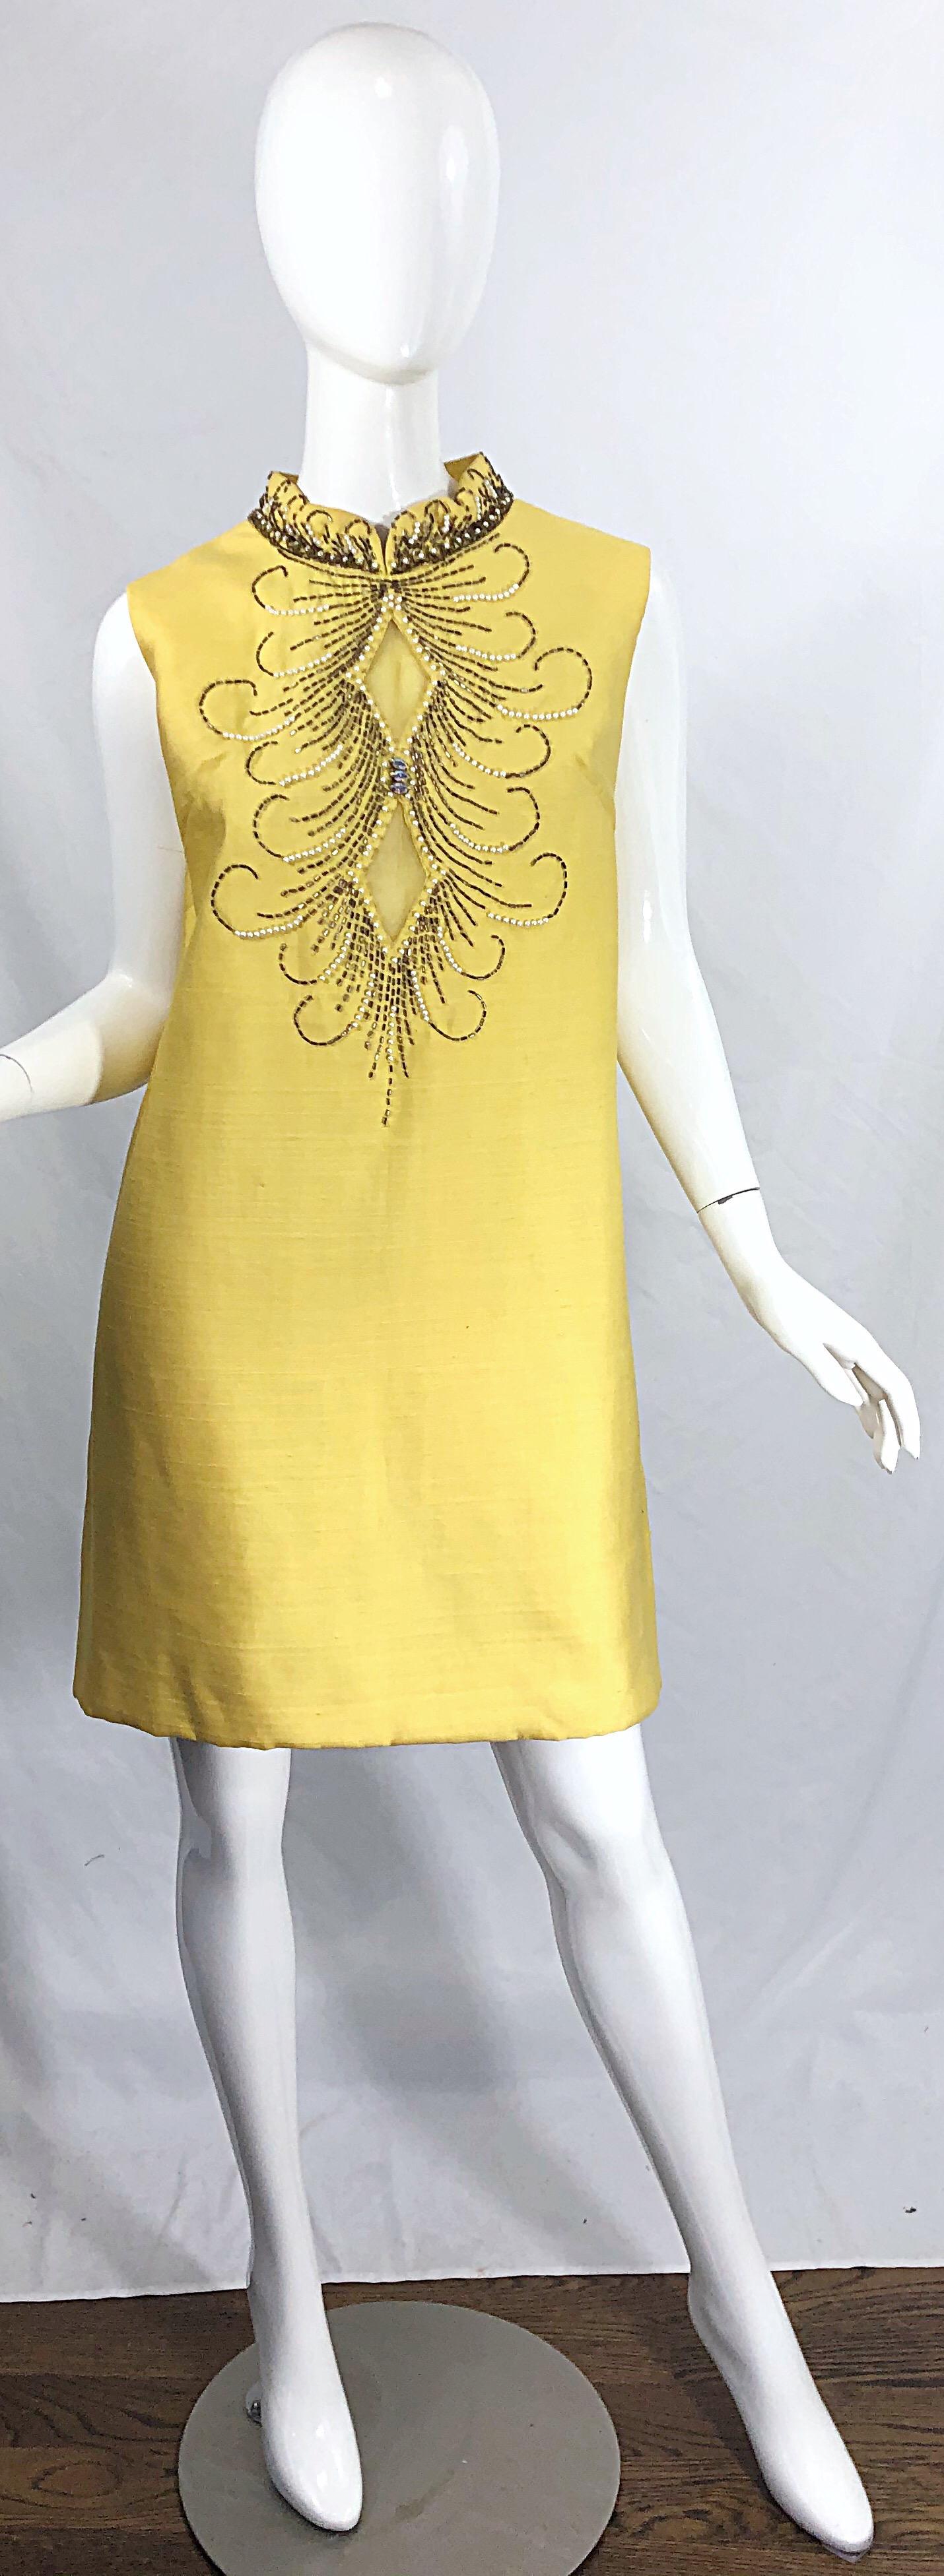 Chic early 60s larger sized yellow beaded, rhinestone and sequin silk shantung shift dress ! Features hundreds of hand sewn beads throughout. Semi sheer diamond shaped mesh cut-outs at the bust. Hidden metal zipper up the back with hook-and-eye